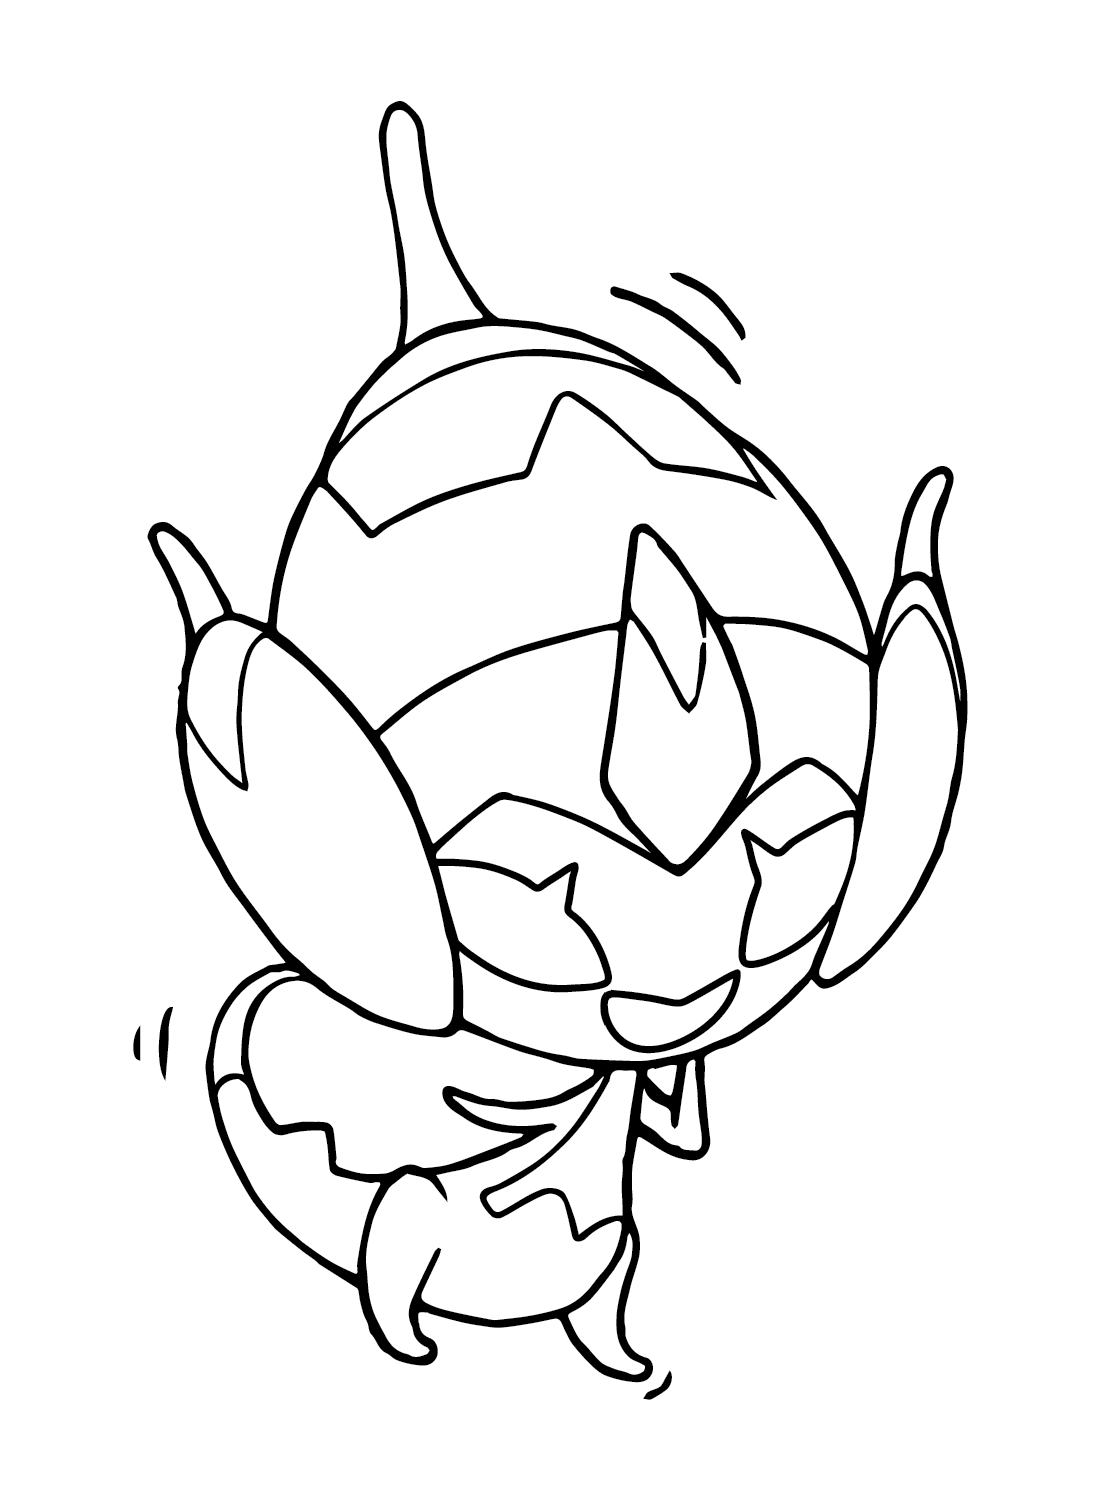 Happy Poipole Coloring Page